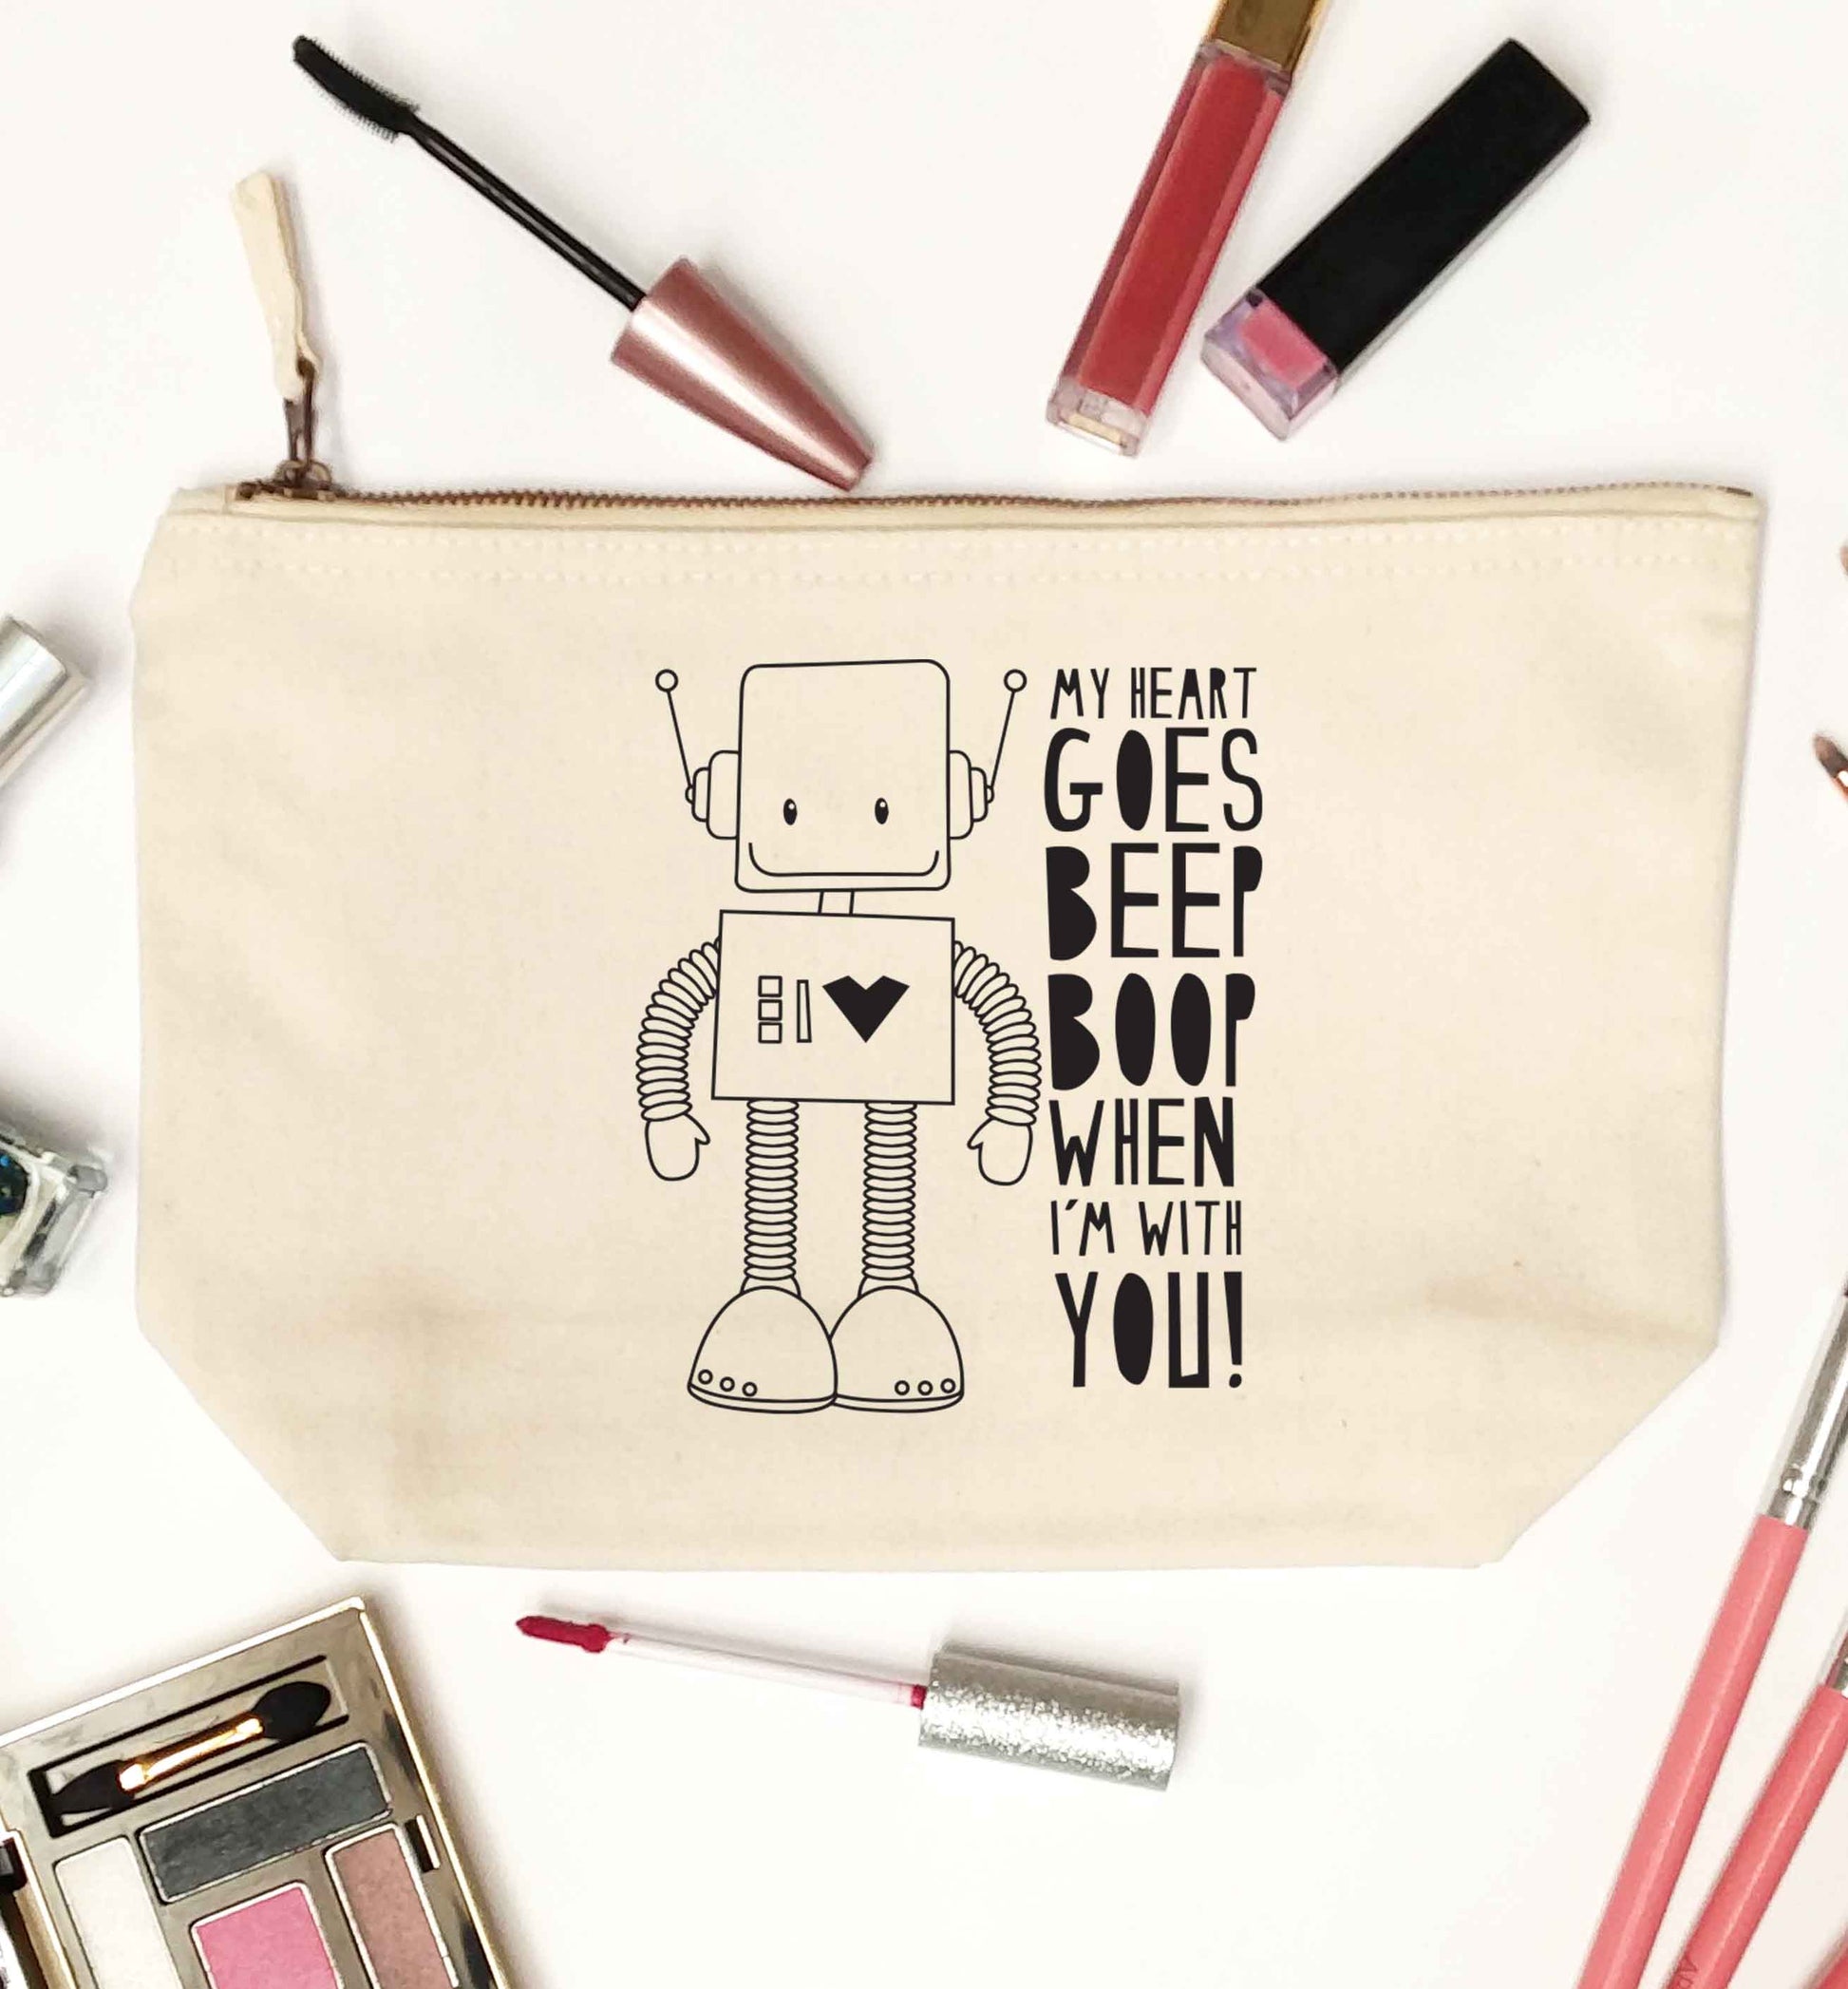 My heart goes beep boop when I'm with you natural makeup bag